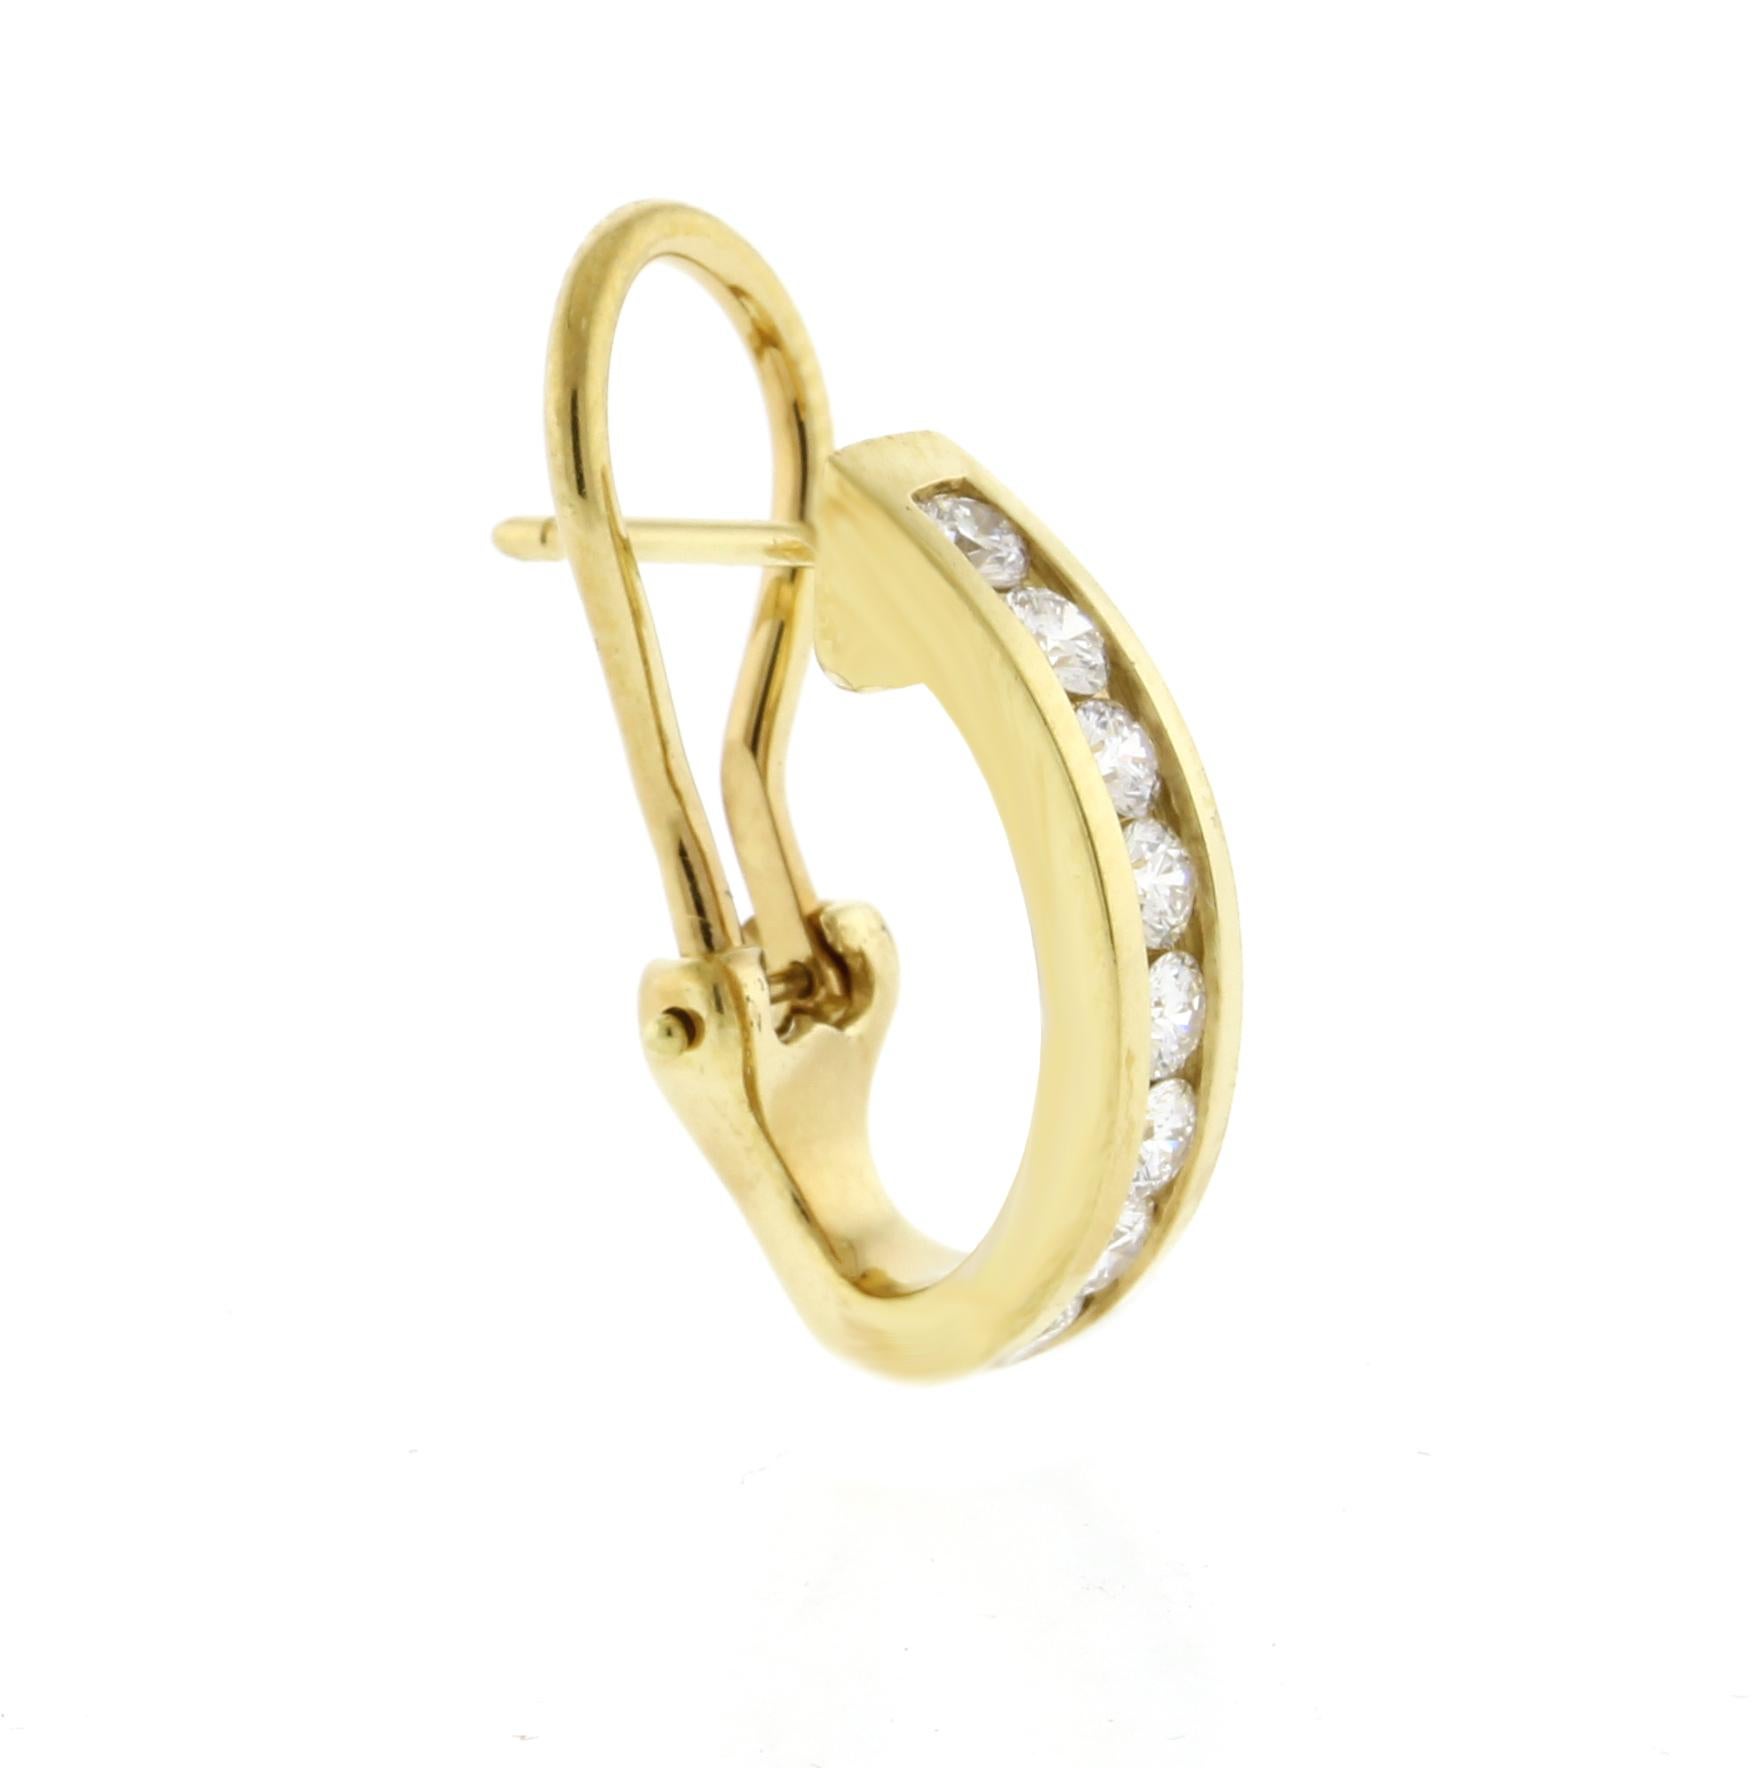 ♦ Designer: Tiffany
♦ Circa: 2010s
♦ Metal: 18 Karat Gold
♦ Length: 3/4 inch
♦  Width: 1/8 inch
♦ Gemstones: 16 Diamonds=.80 cts
♦ Packaging: Tiffany Pouch
♦ Condition: Excellent, pre-owned.